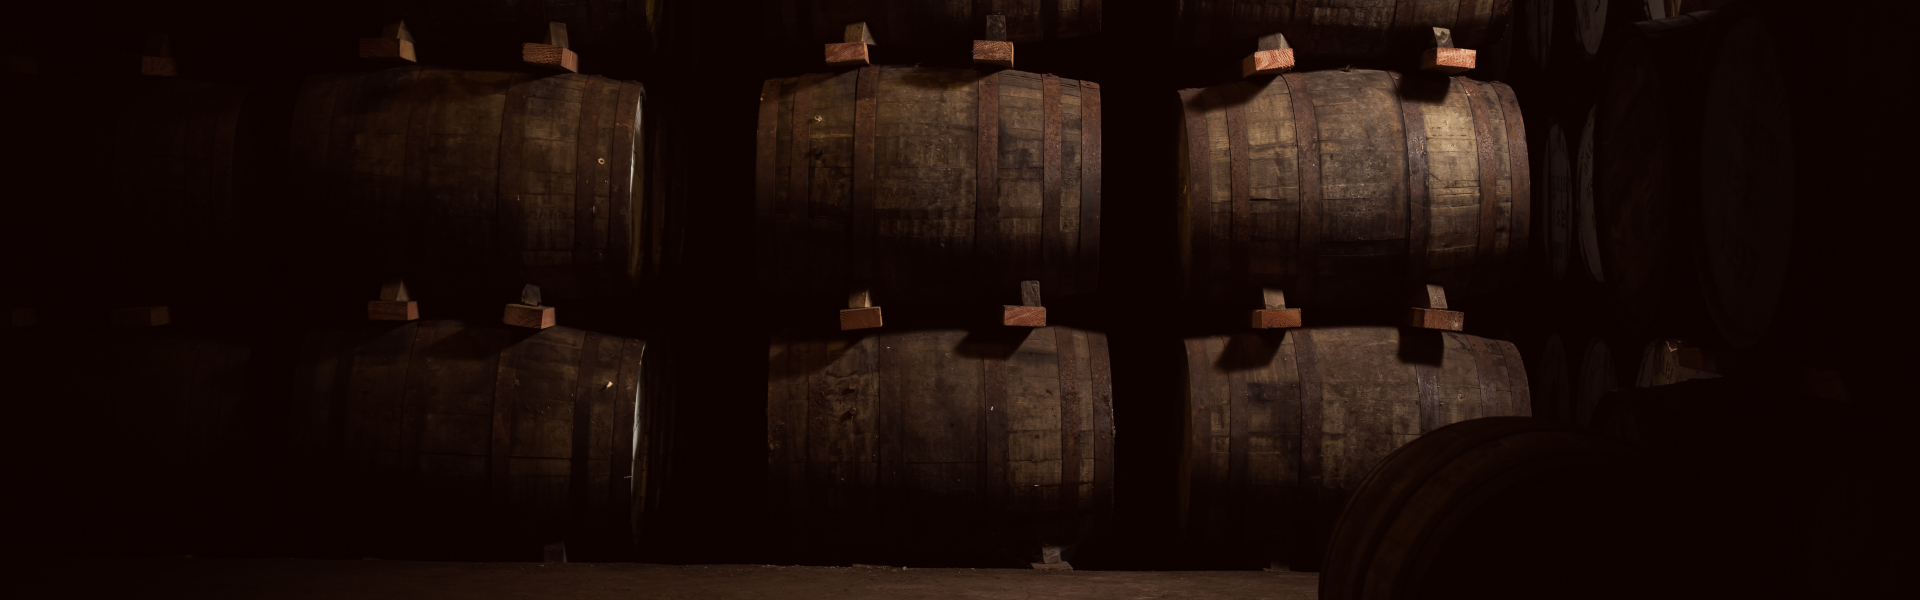 Our malt is crafted slowly and is matured at the distillery in traditional dunnage warehouses on earthen floors. 